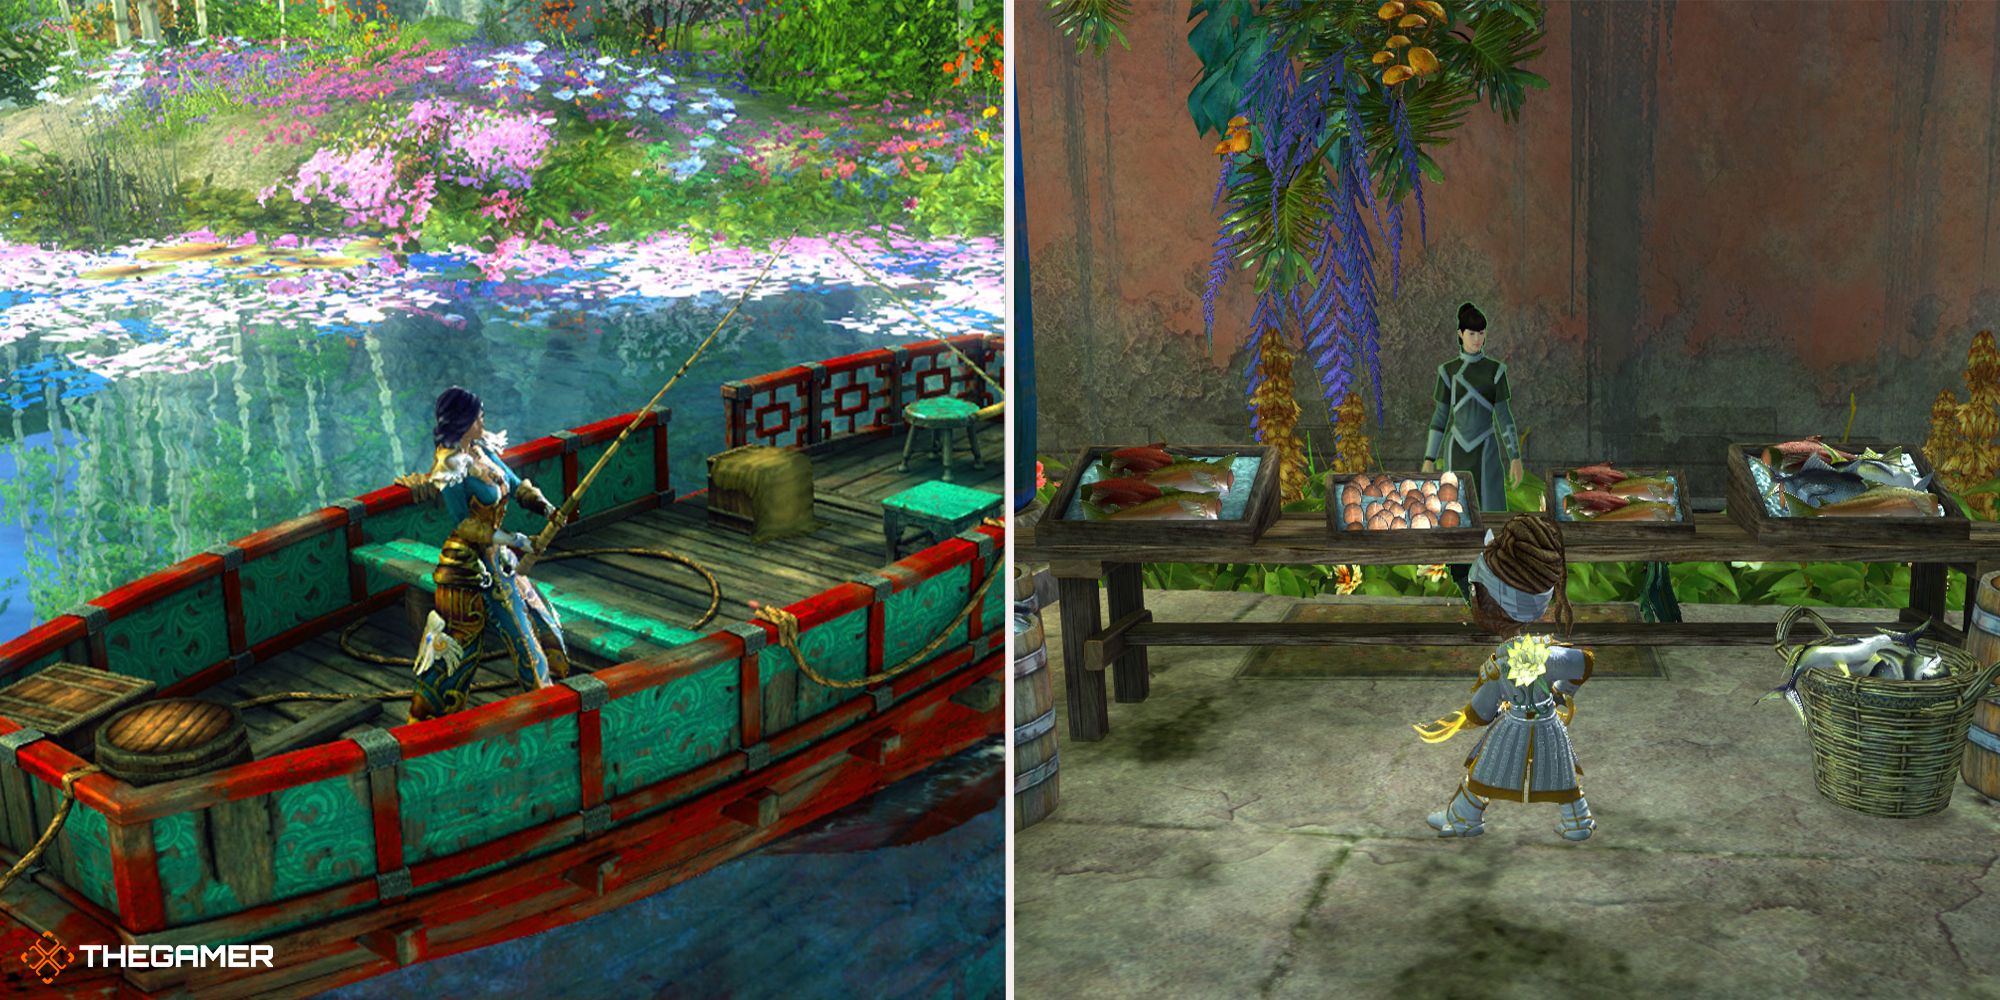 guild wars 2 end of dragons - player fishing on left, fish vendor on right